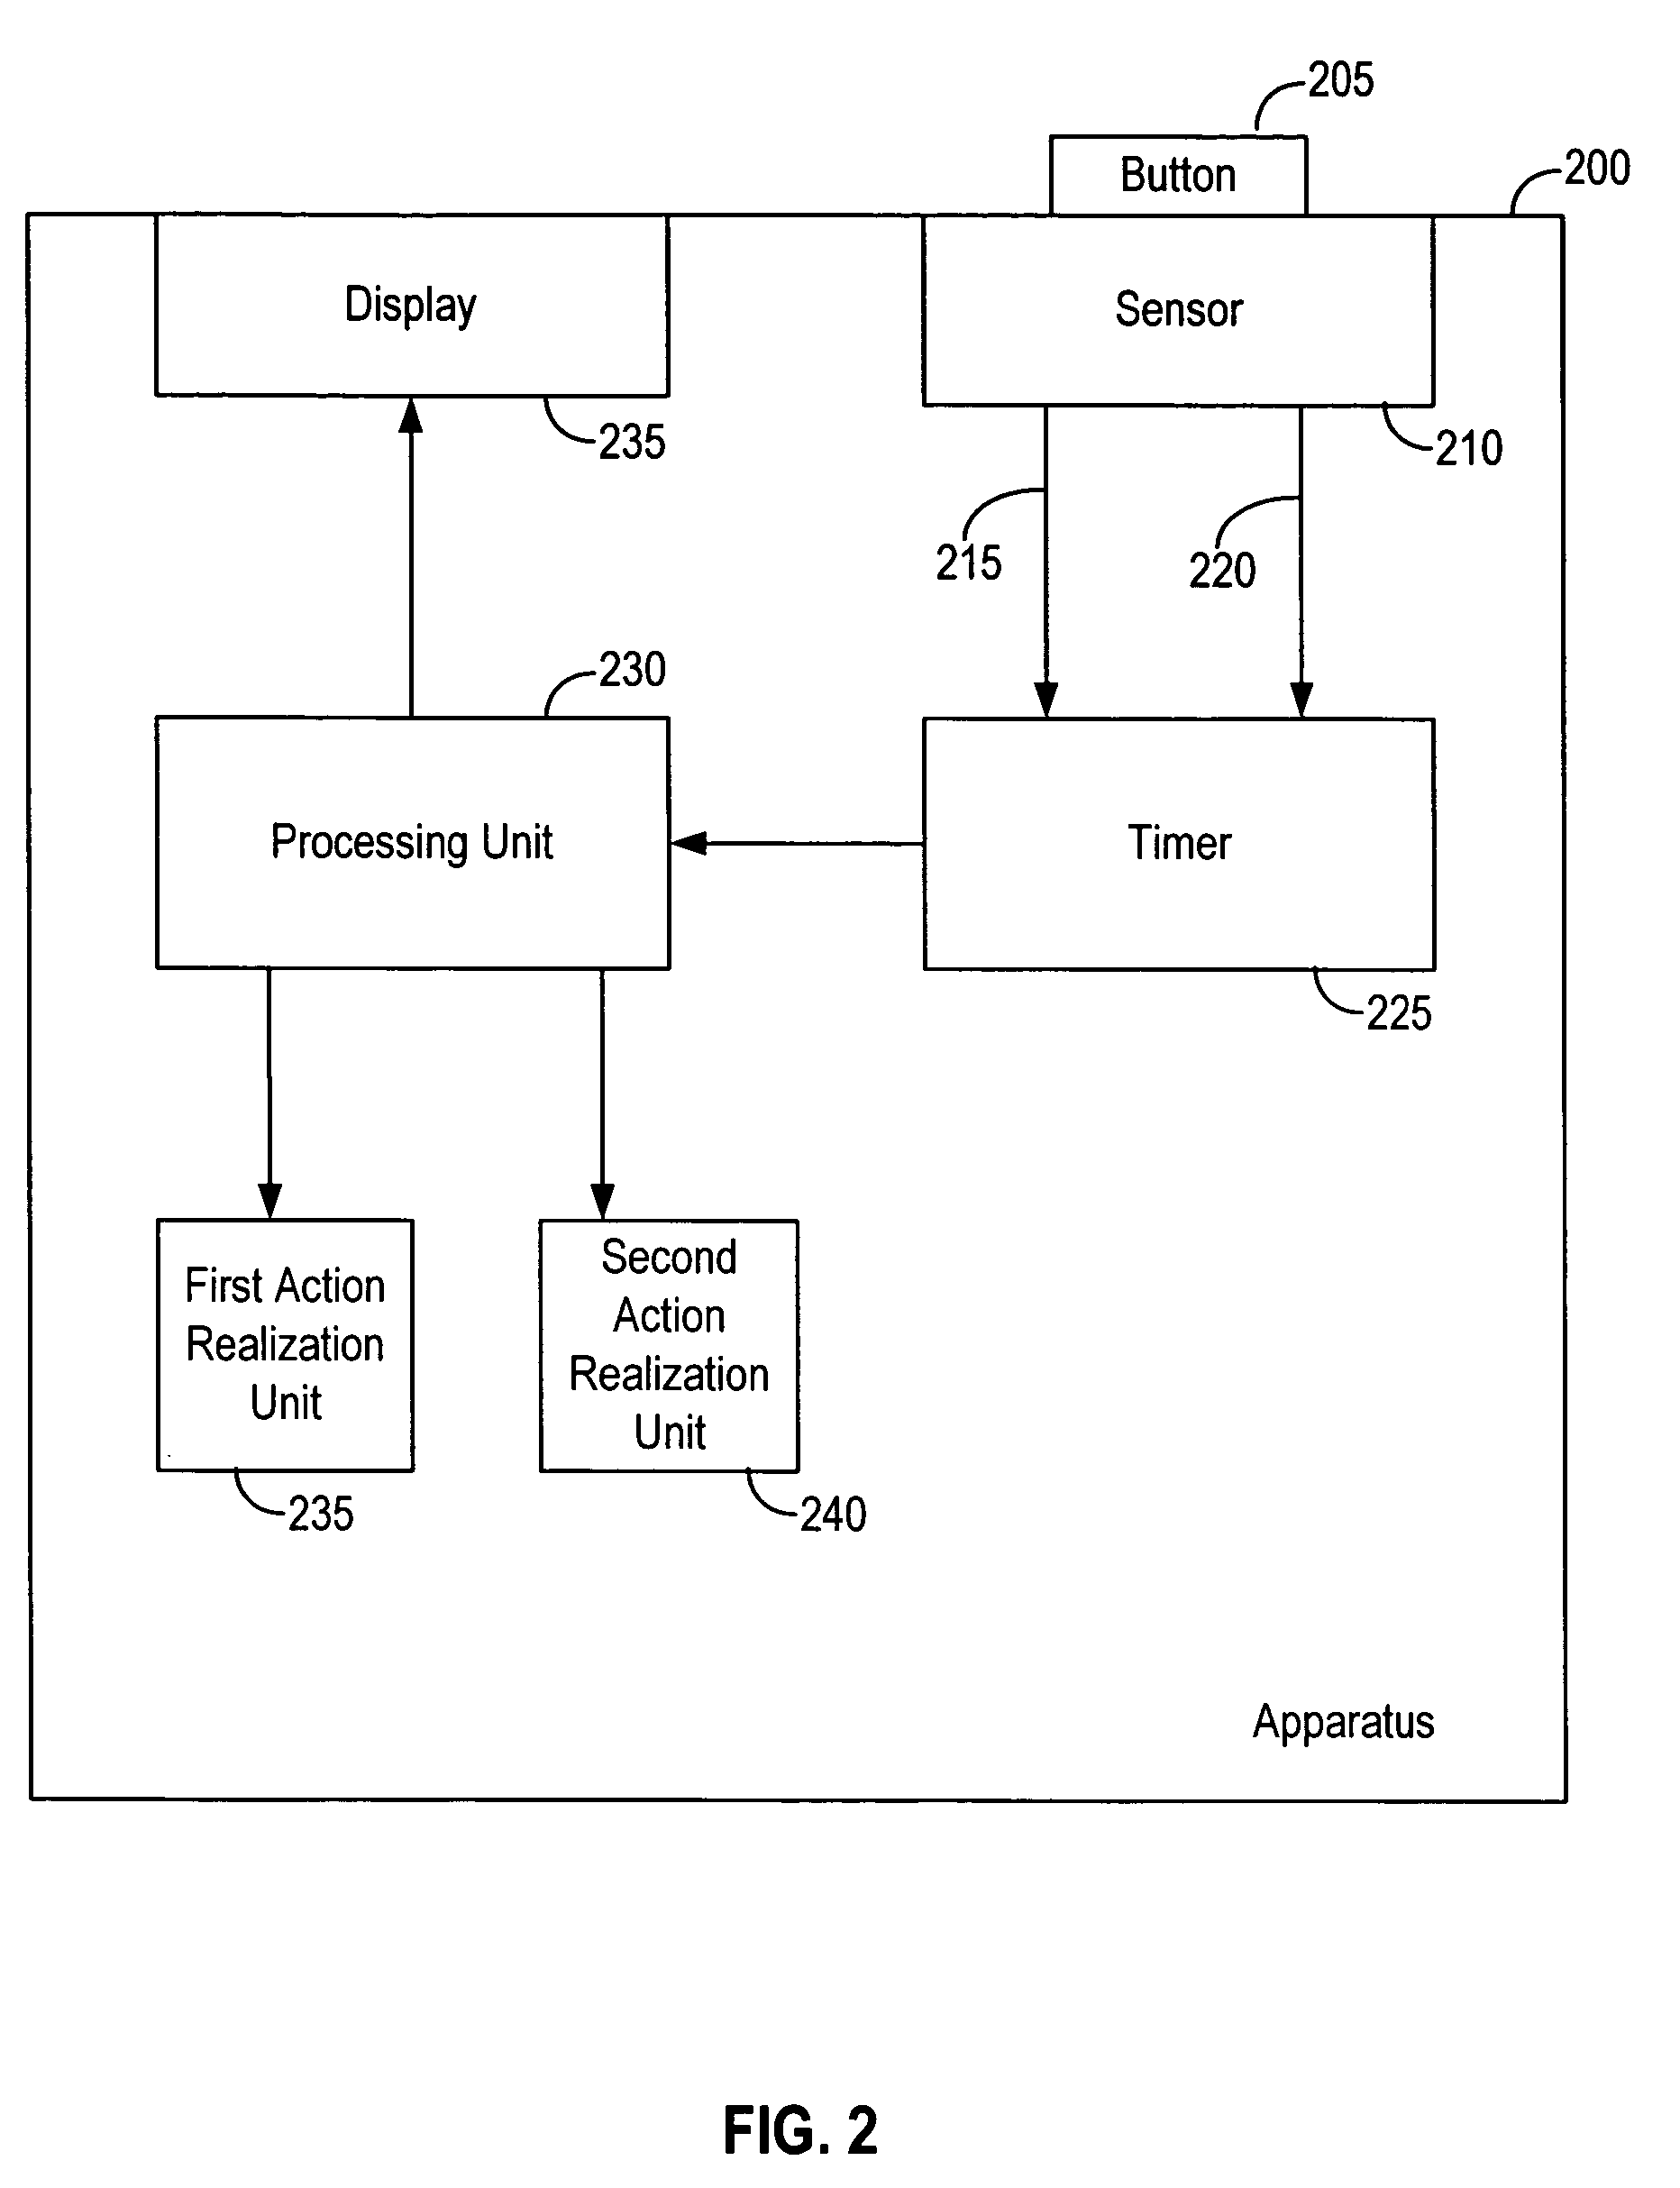 Method for describing alternative actions caused by pushing a single button